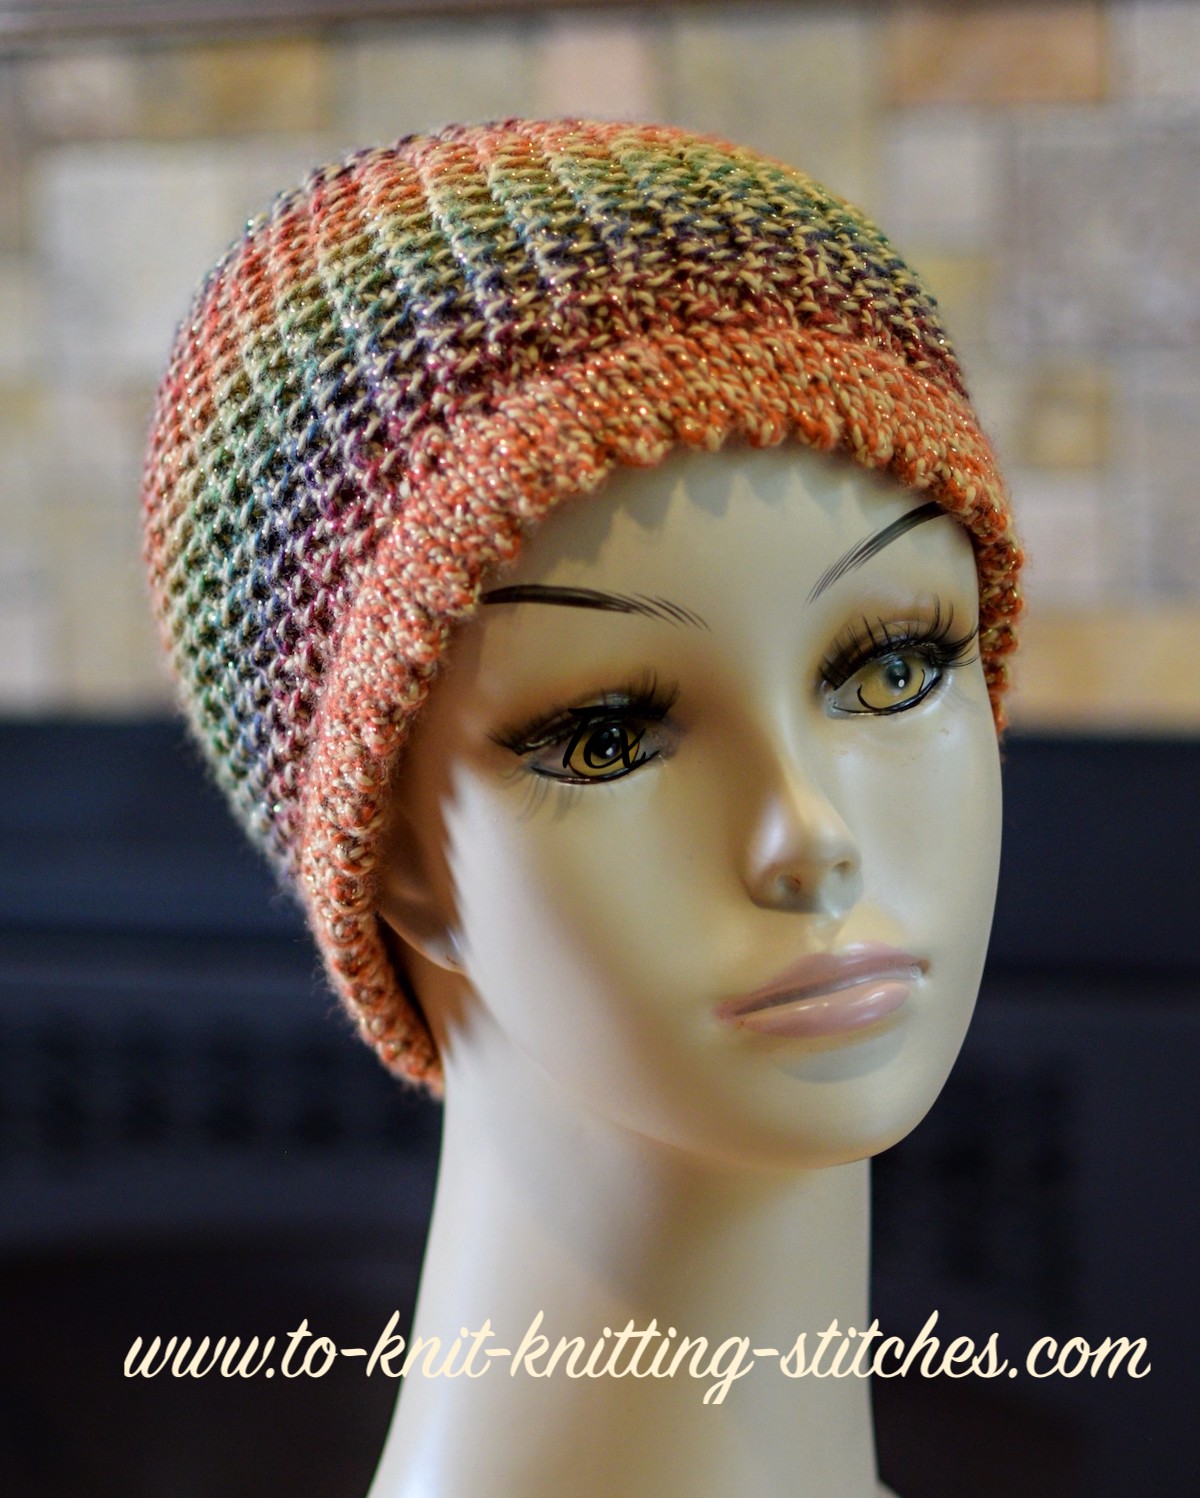 Here is a pattern for a cute beanie hat to share with my friends, knitters.  Easy and fast to make.  